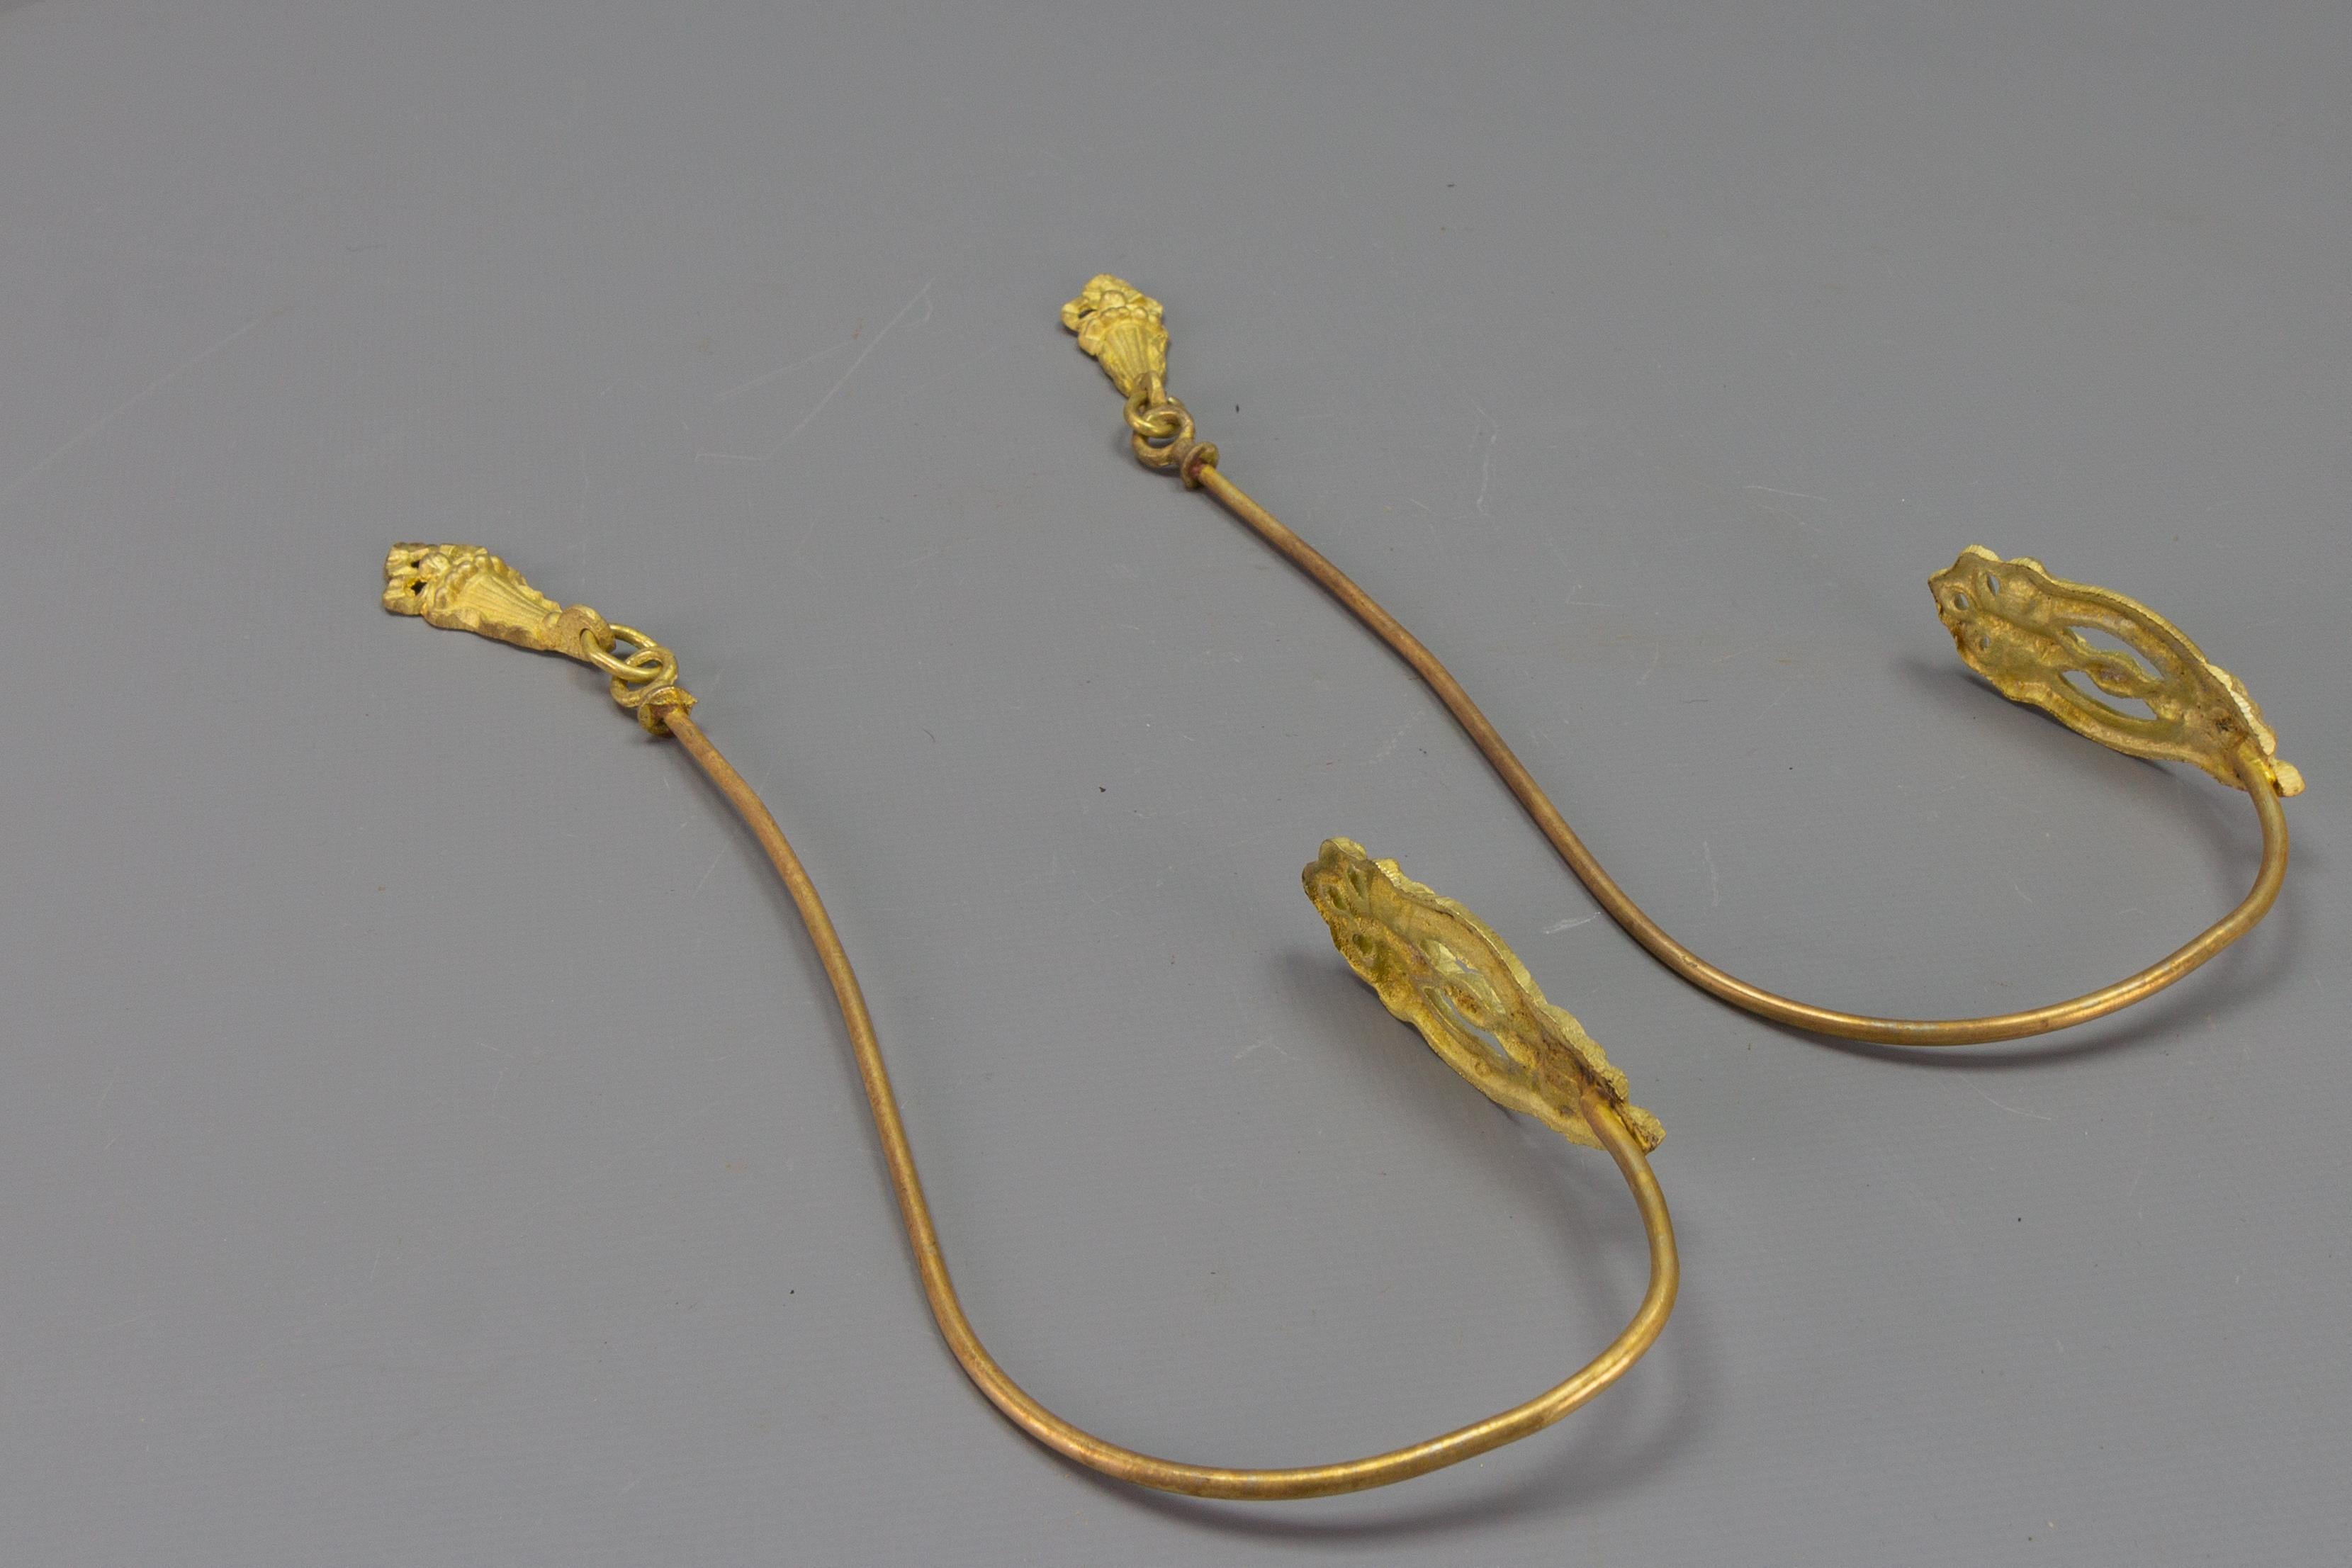 Pair of French Bronze and Brass Curtain Tiebacks or Curtain Holders, ca. 1920 For Sale 2